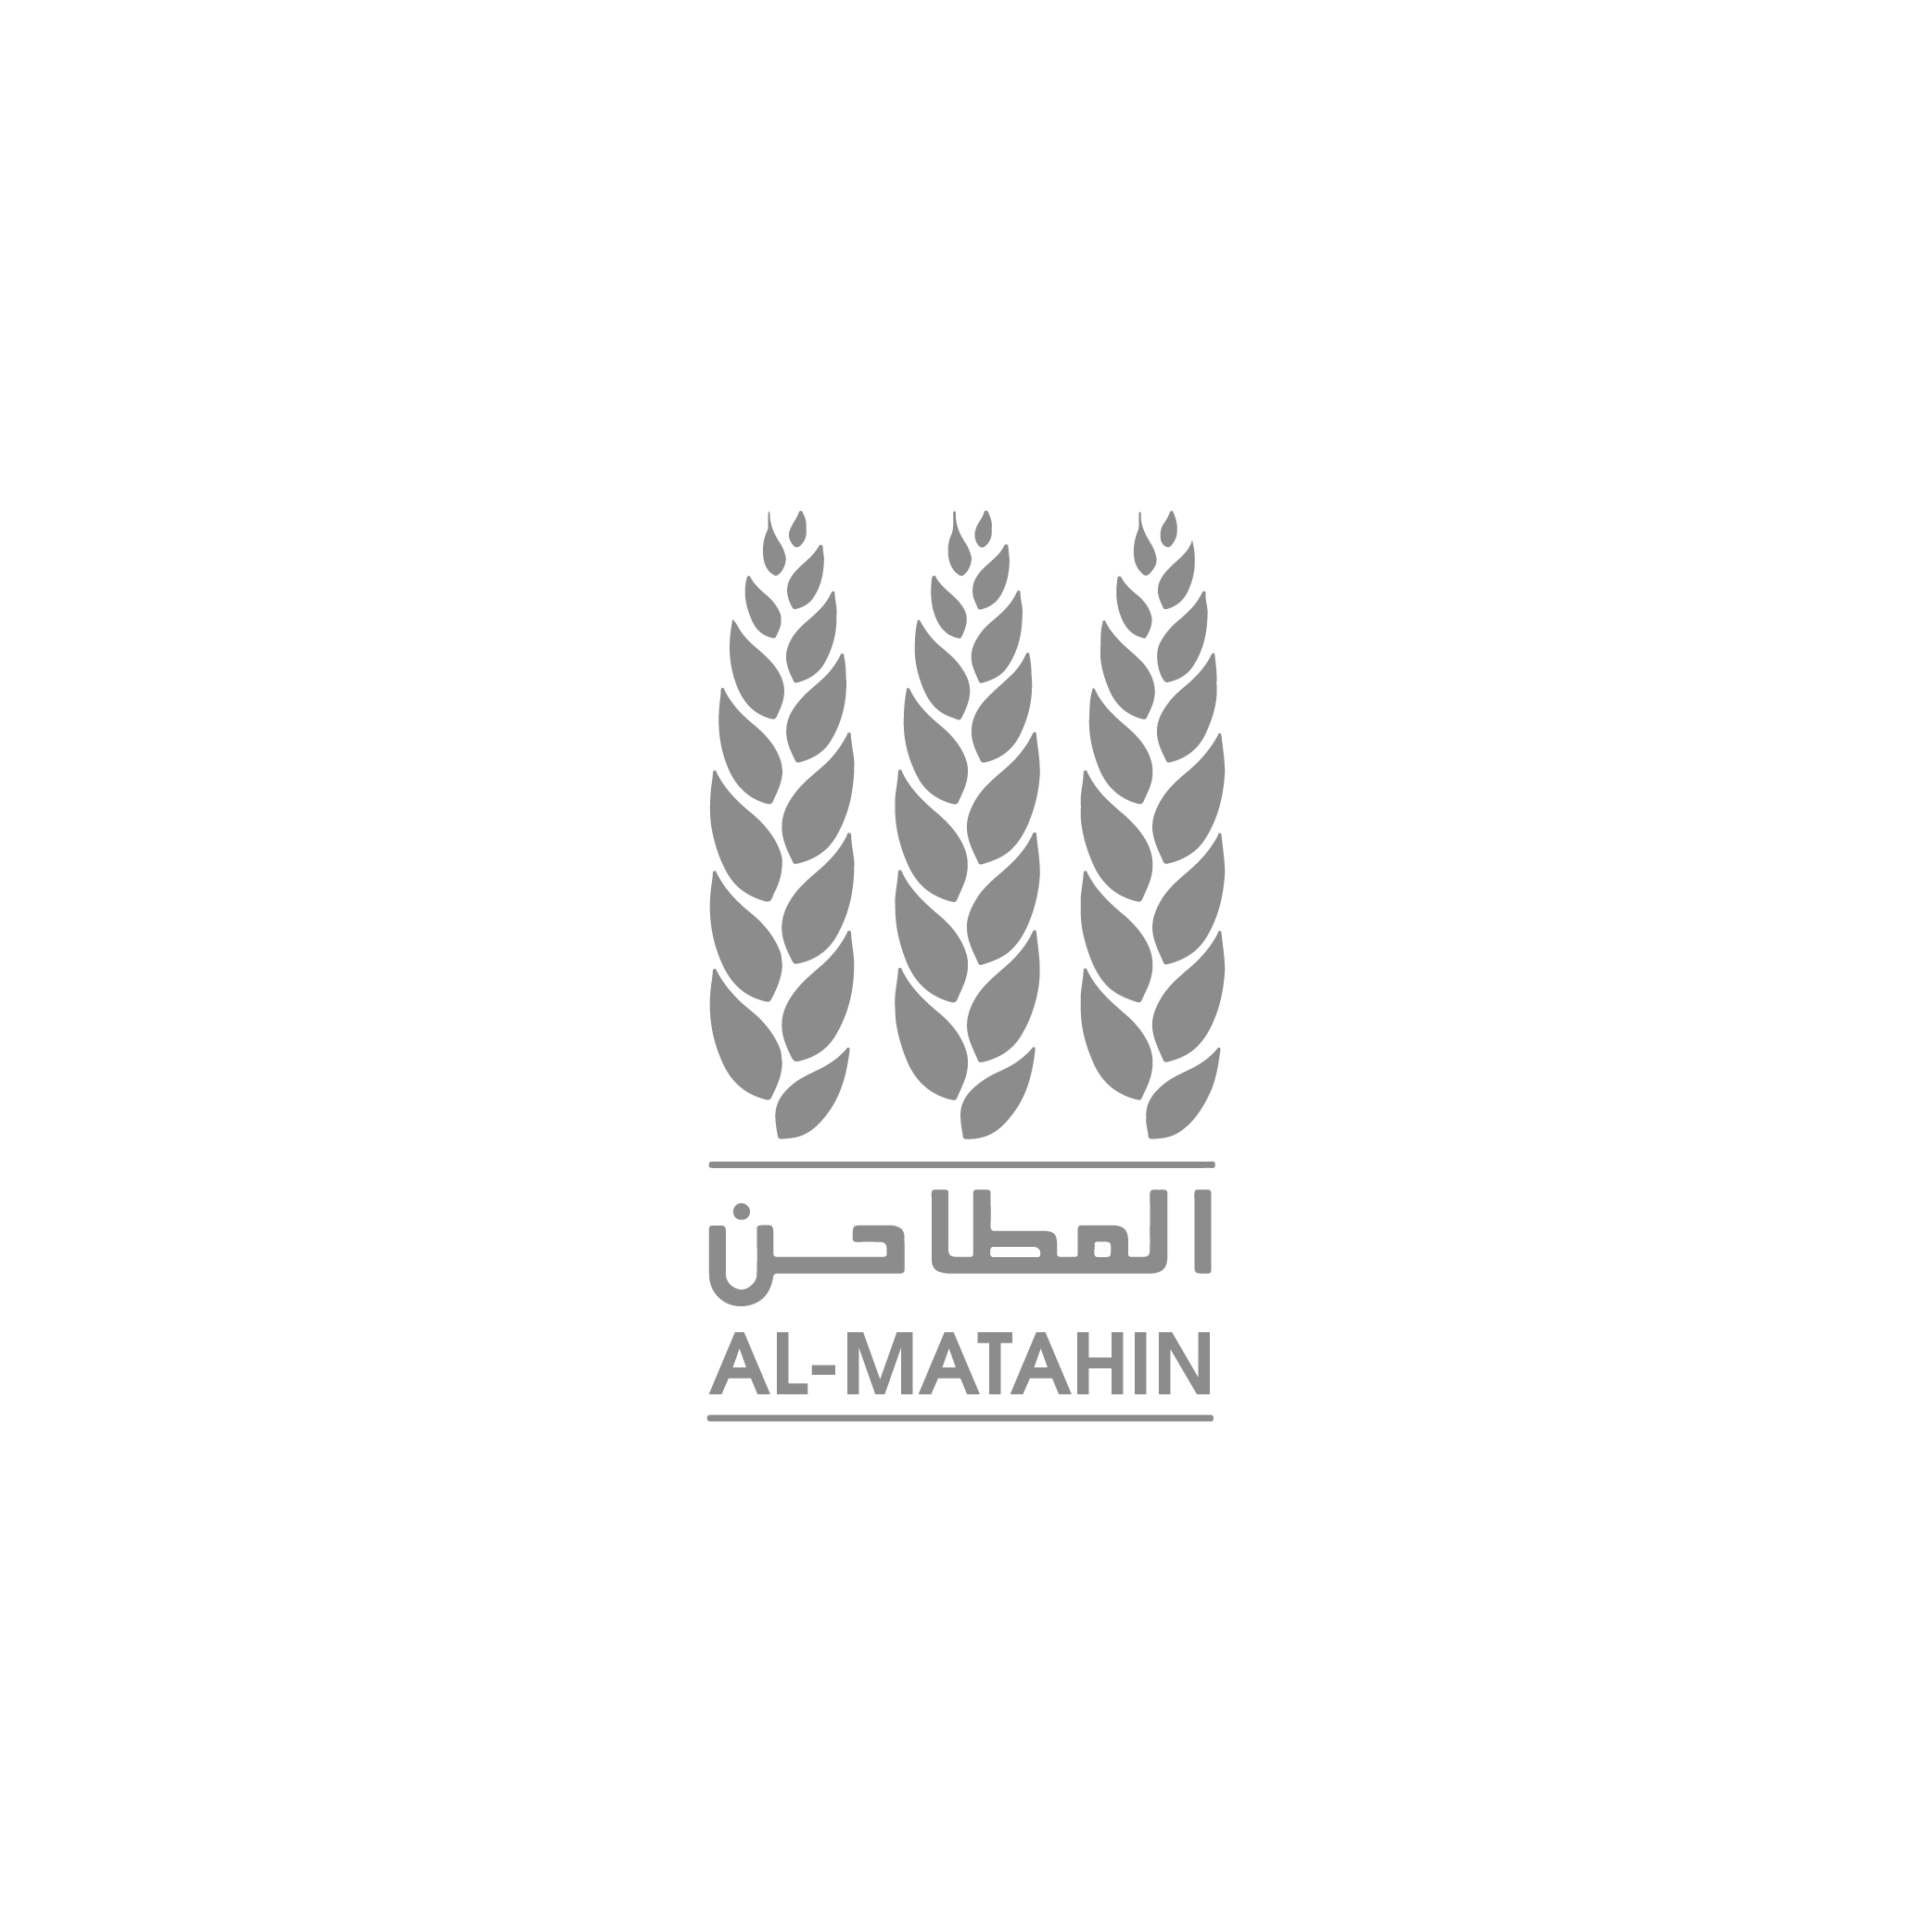 Al Matahin Secure Their Stocks of Wheat and Flour for the Month of Ramadan